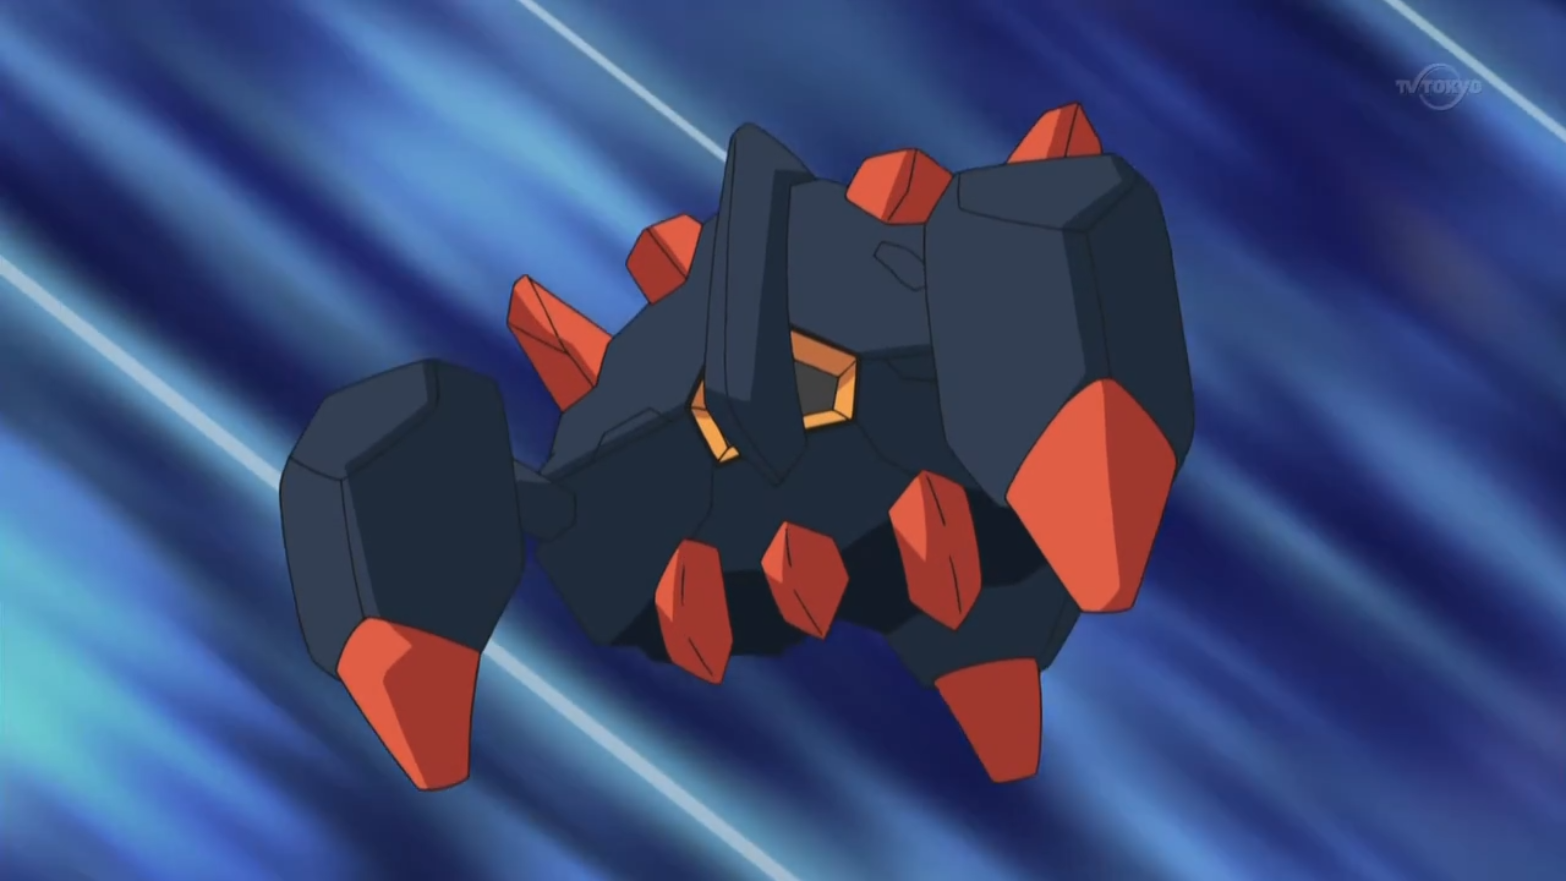 Boldore in launches forward in the Pokémon anime.